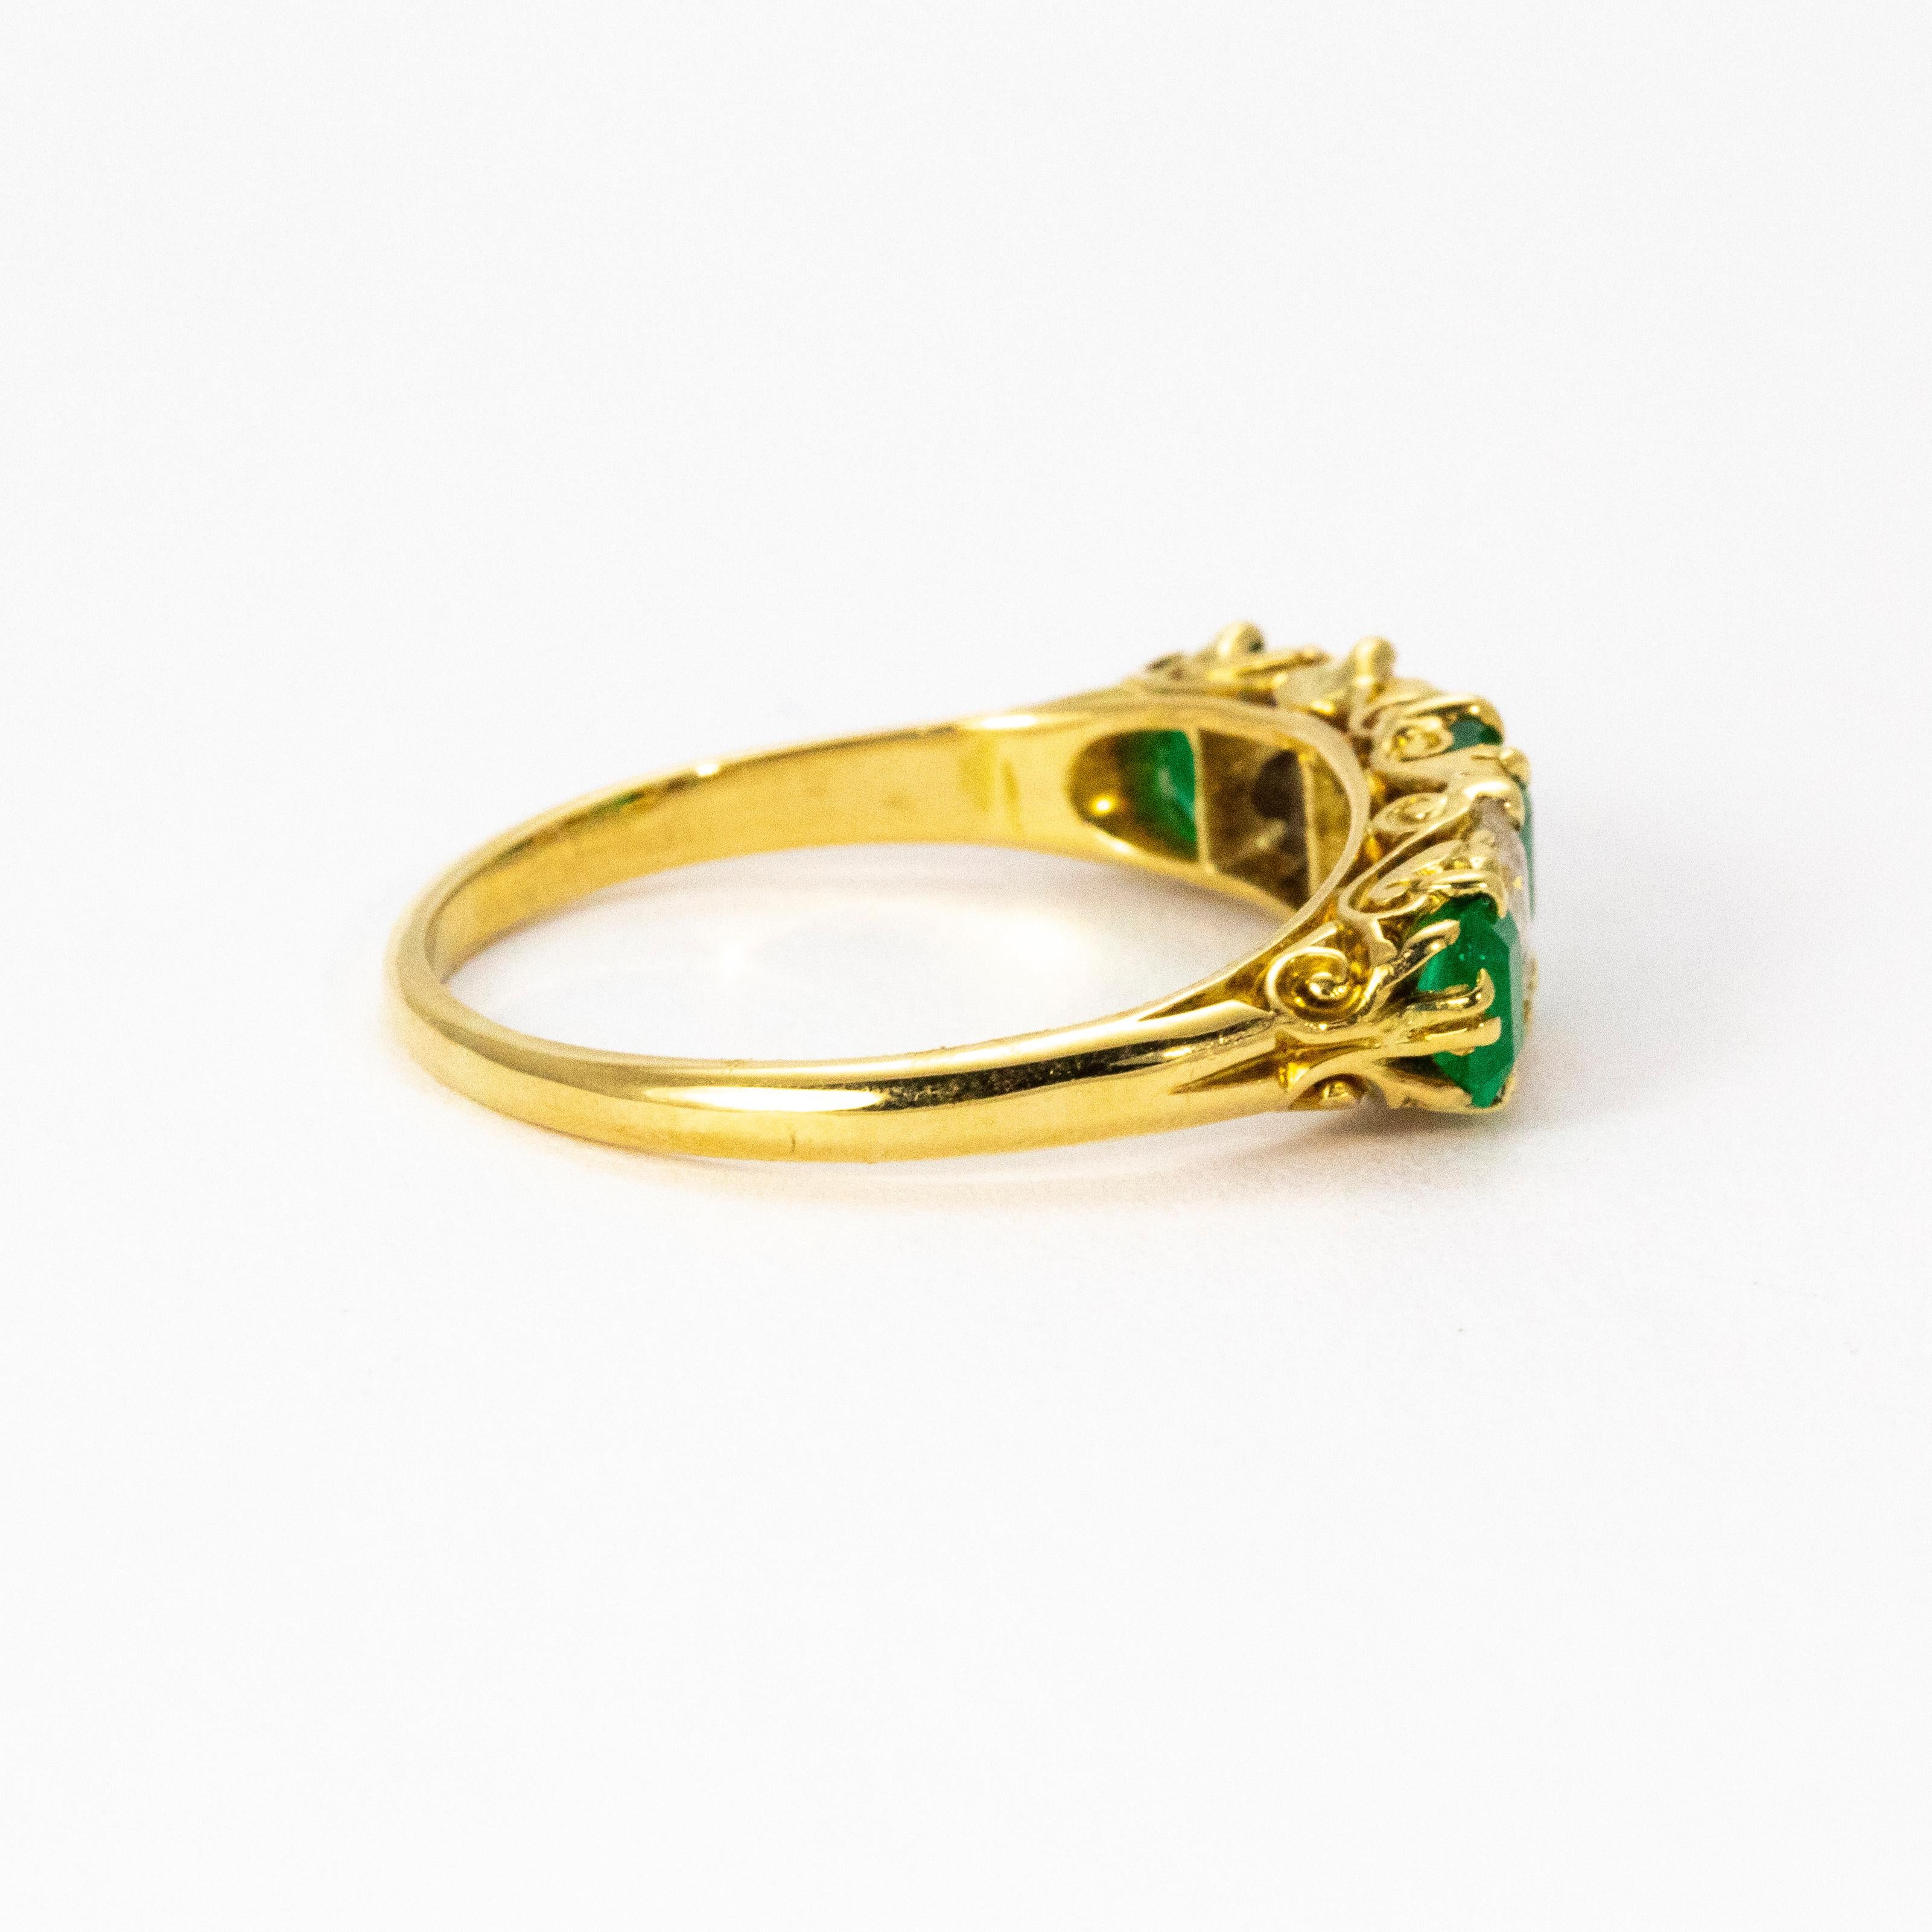 Late Victorian Vintage 18 Karat Yellow Gold Diamond and Emerald Five-Stone Ring